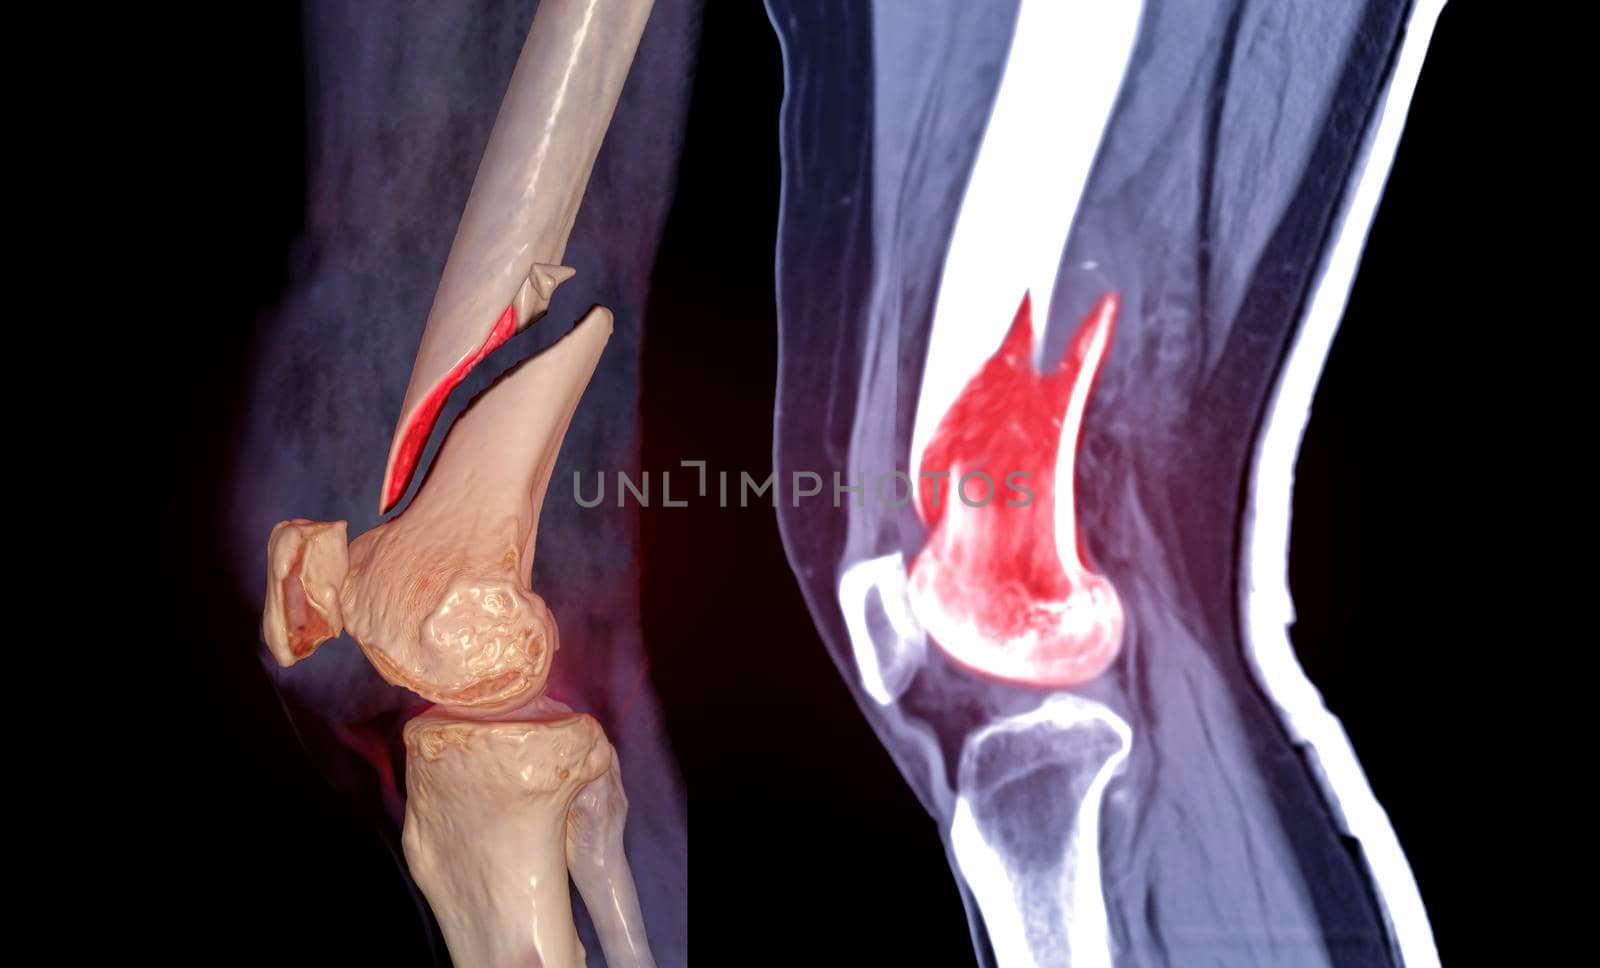 CT knee joint 3D rendering image lateral view and Sagittal view isolated on black background showing fracture Femur bone.